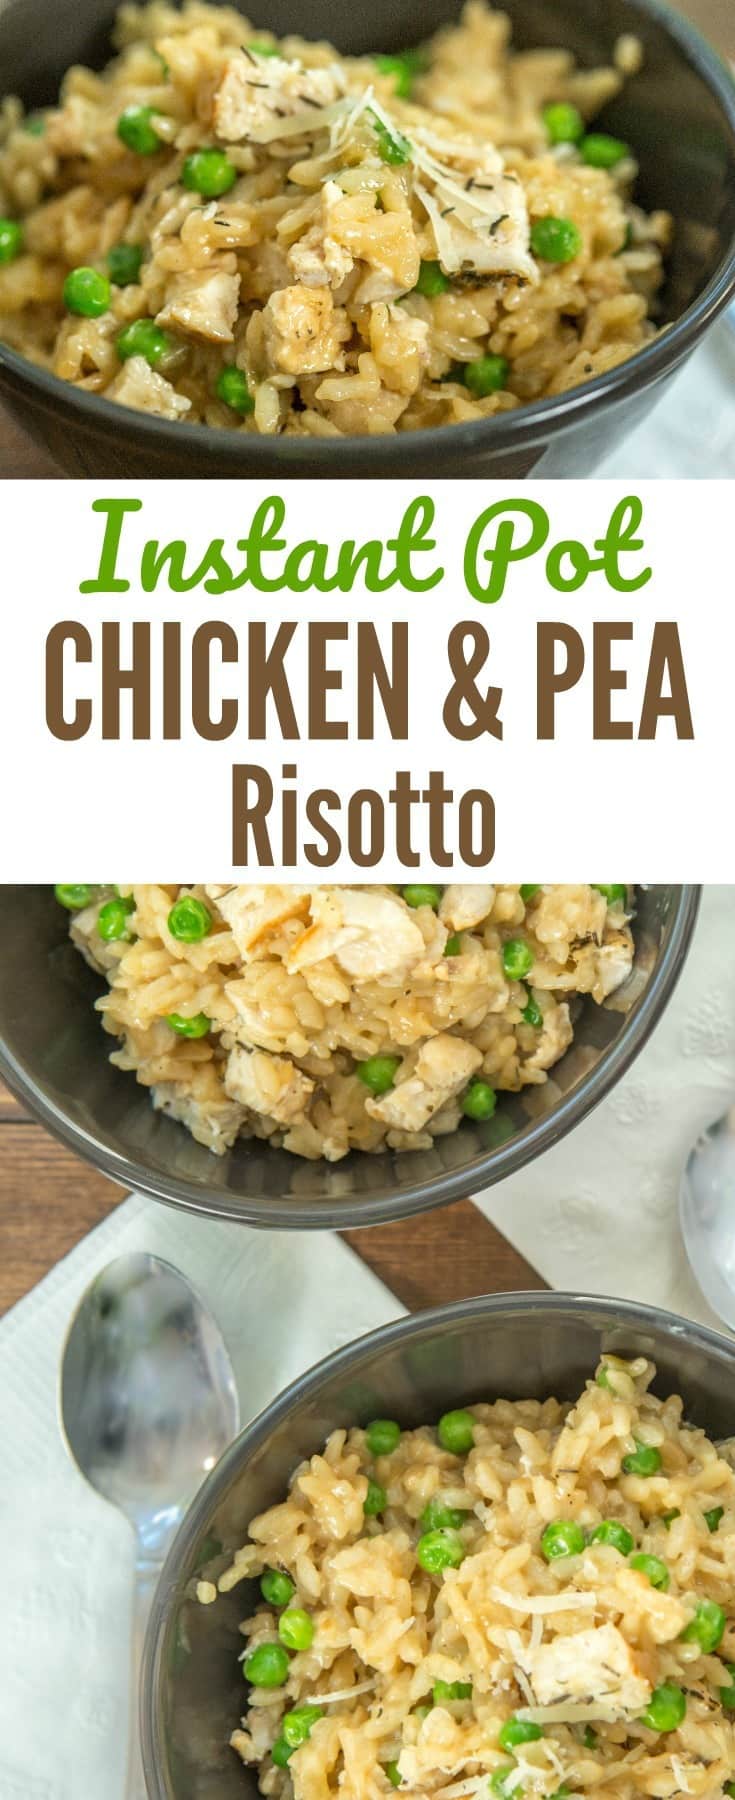 This Instant Pot Chicken and Pea Risotto is the perfect dish after a hard day and the kids love it too! #instantpot #pressurecooker #risotto #chicken via @wondermomwannab